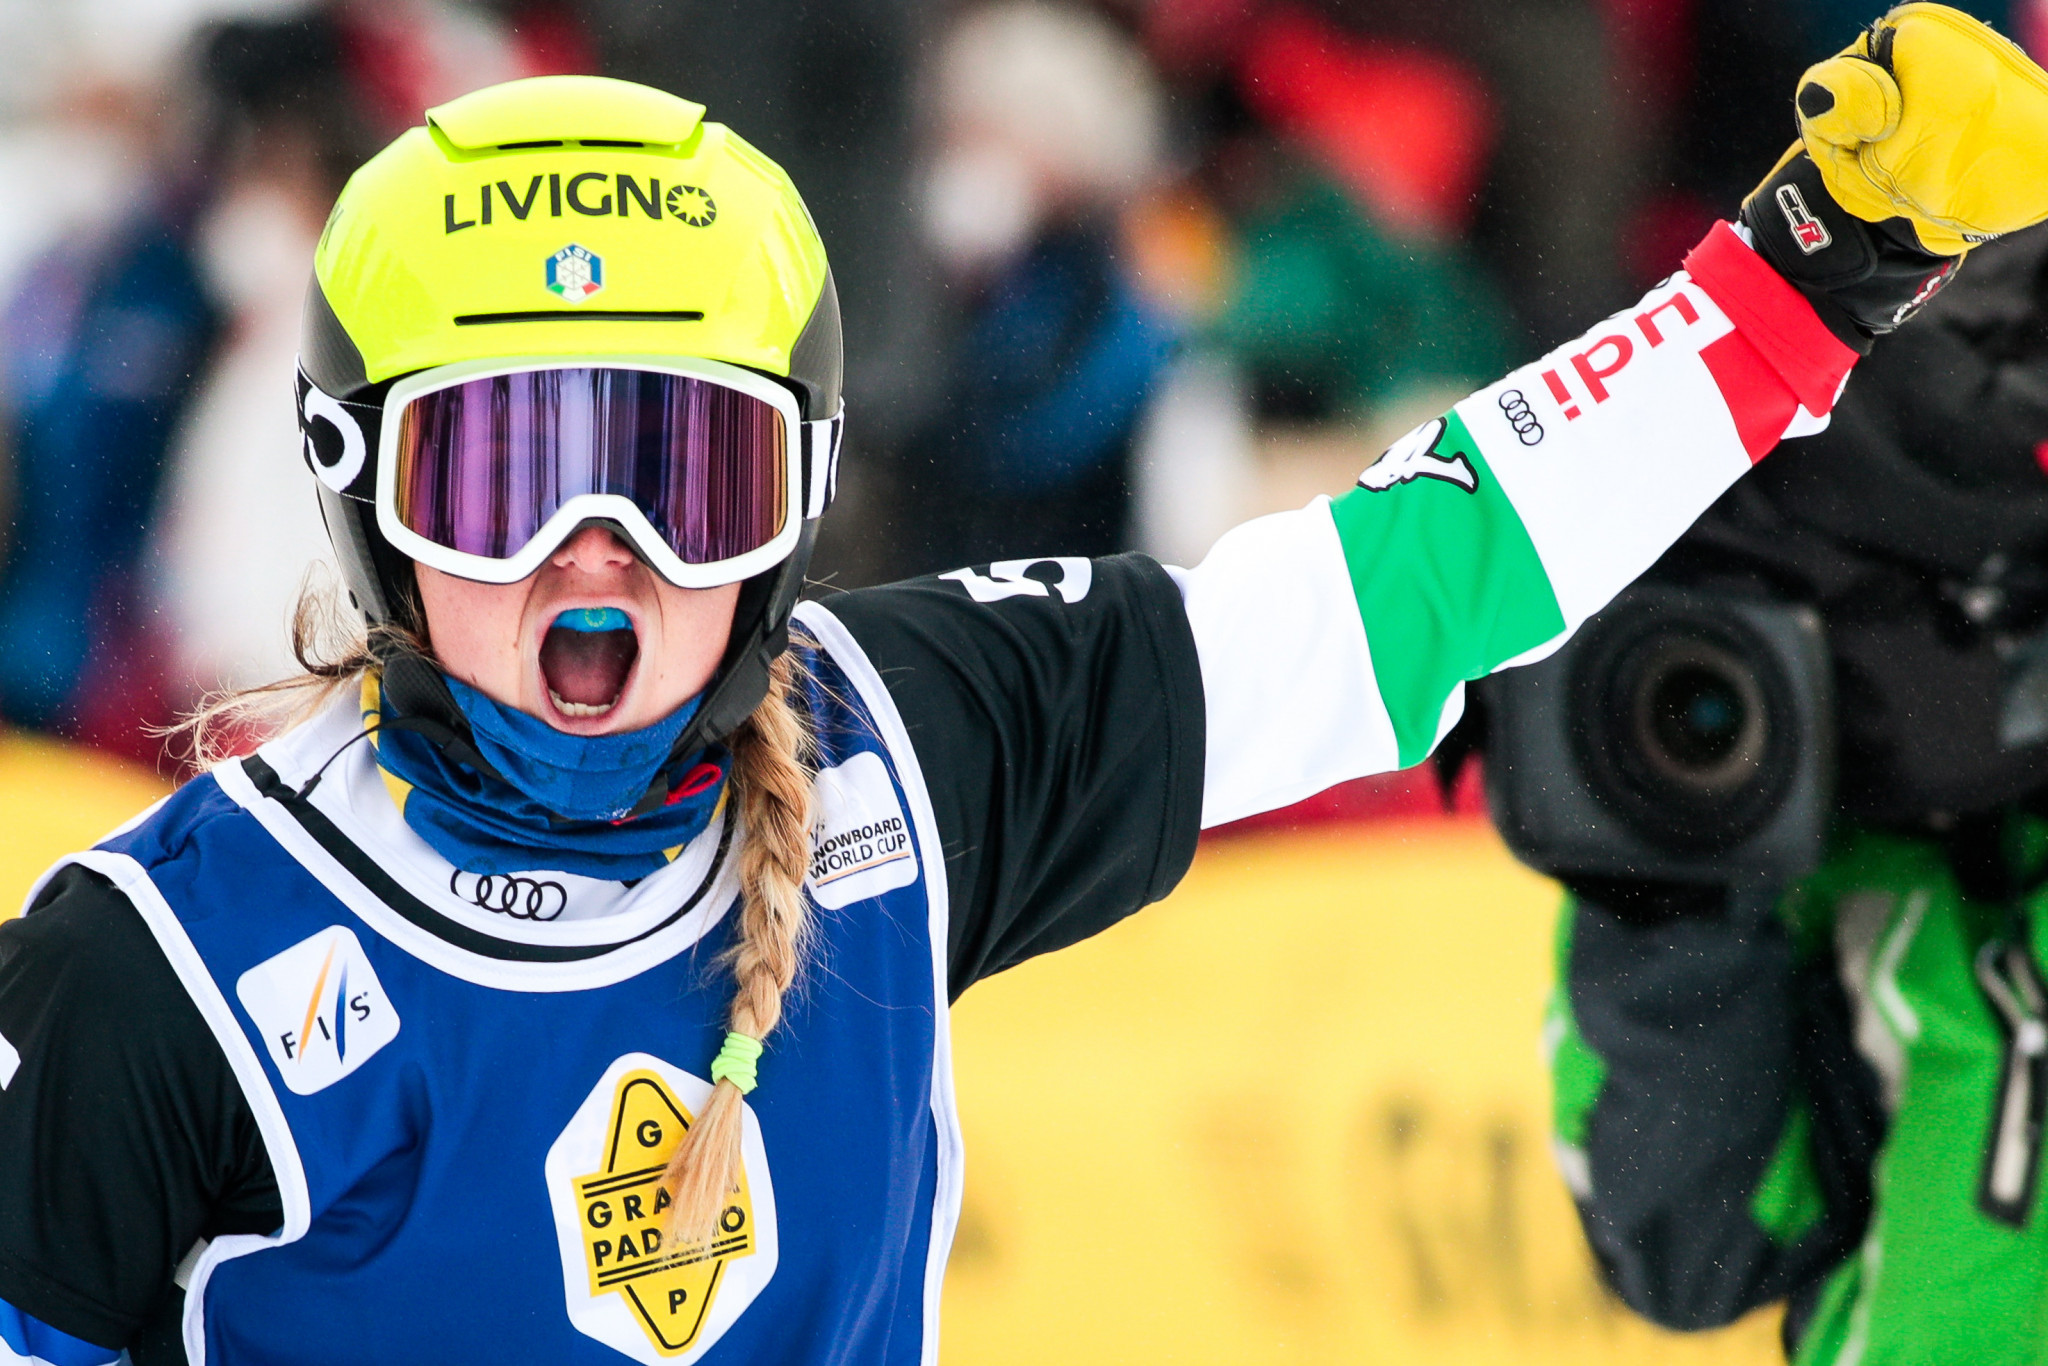 Michela Moioli of Italy is the defending women's snowboard cross Olympic champion ©Getty Images